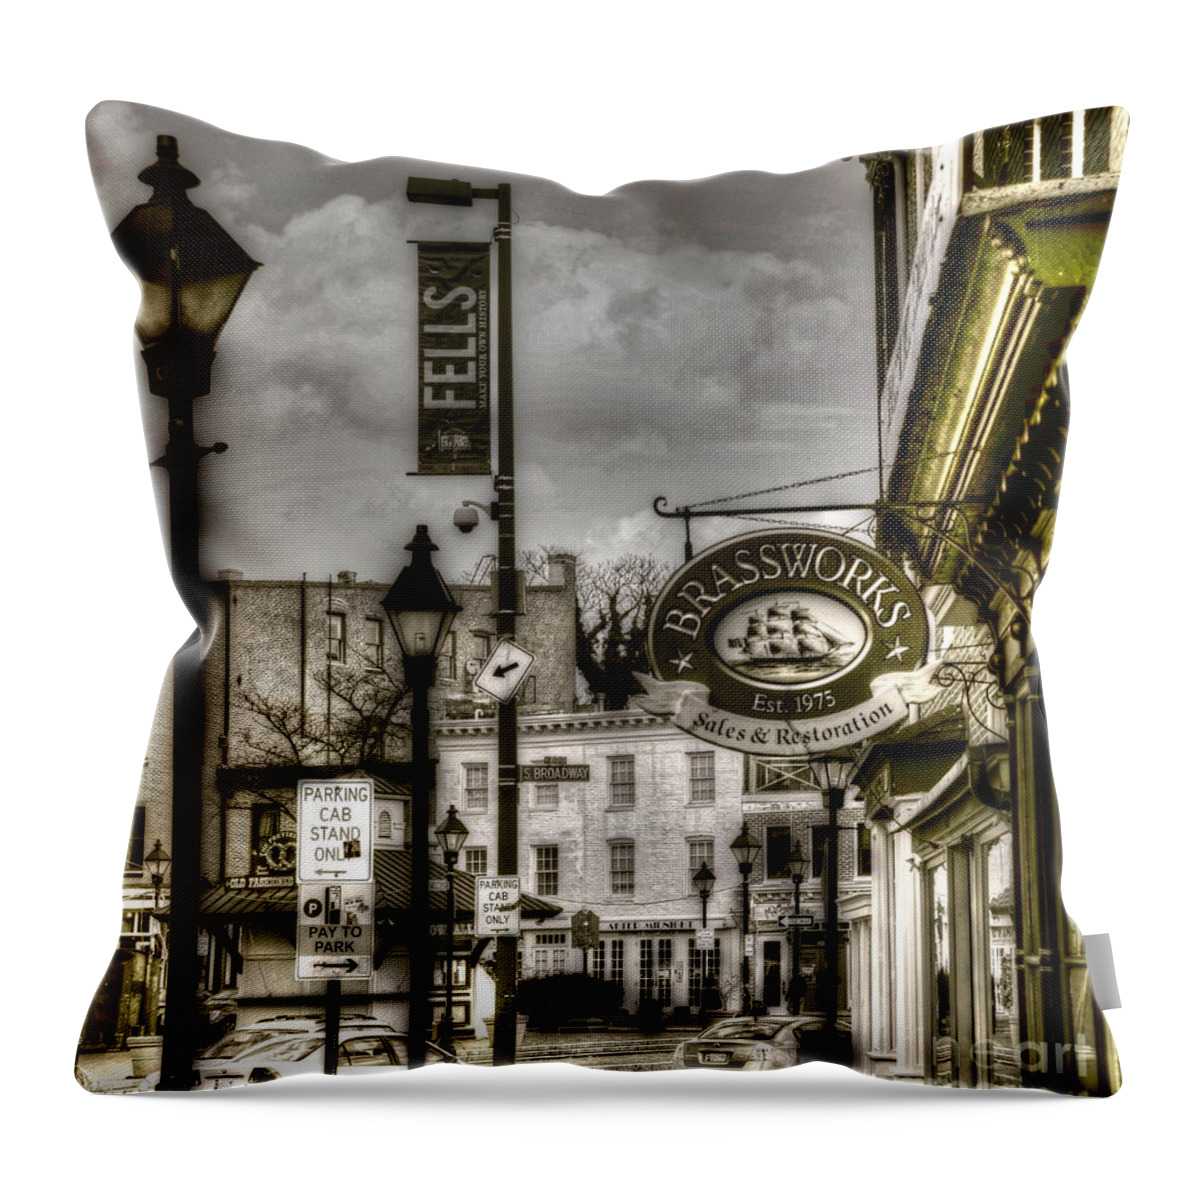 Fells Point Throw Pillow featuring the photograph Brassworks by Debbi Granruth